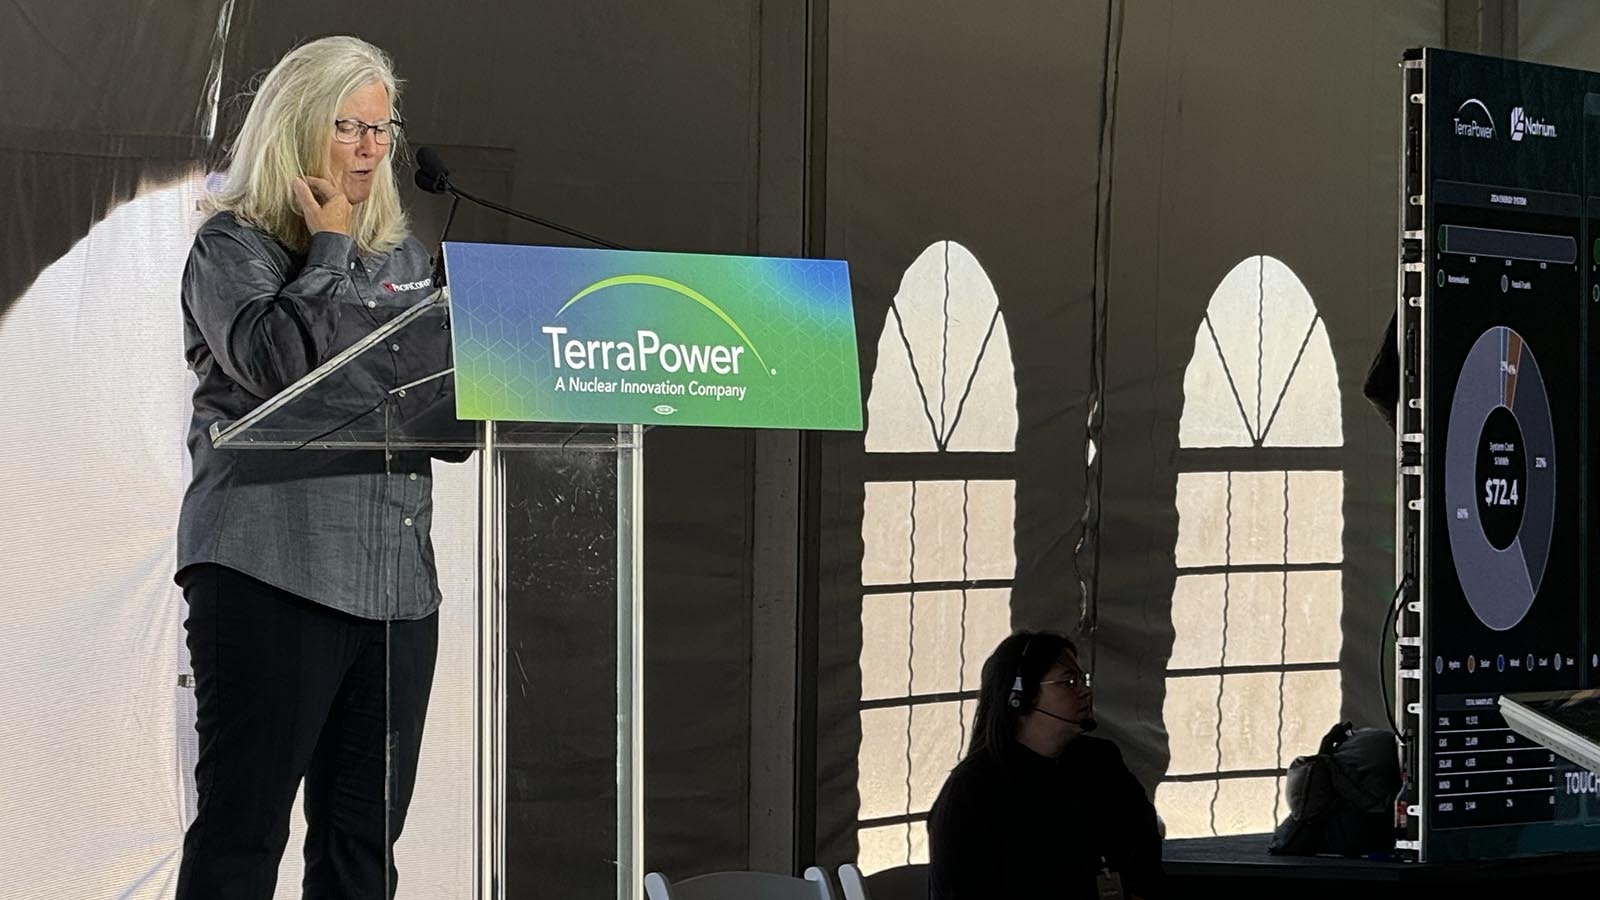 PacifiCorp CEO Cindy Crane delivers remarks at the TerraPower groundbreaking ceremony in Kemmerer, Wyoming.